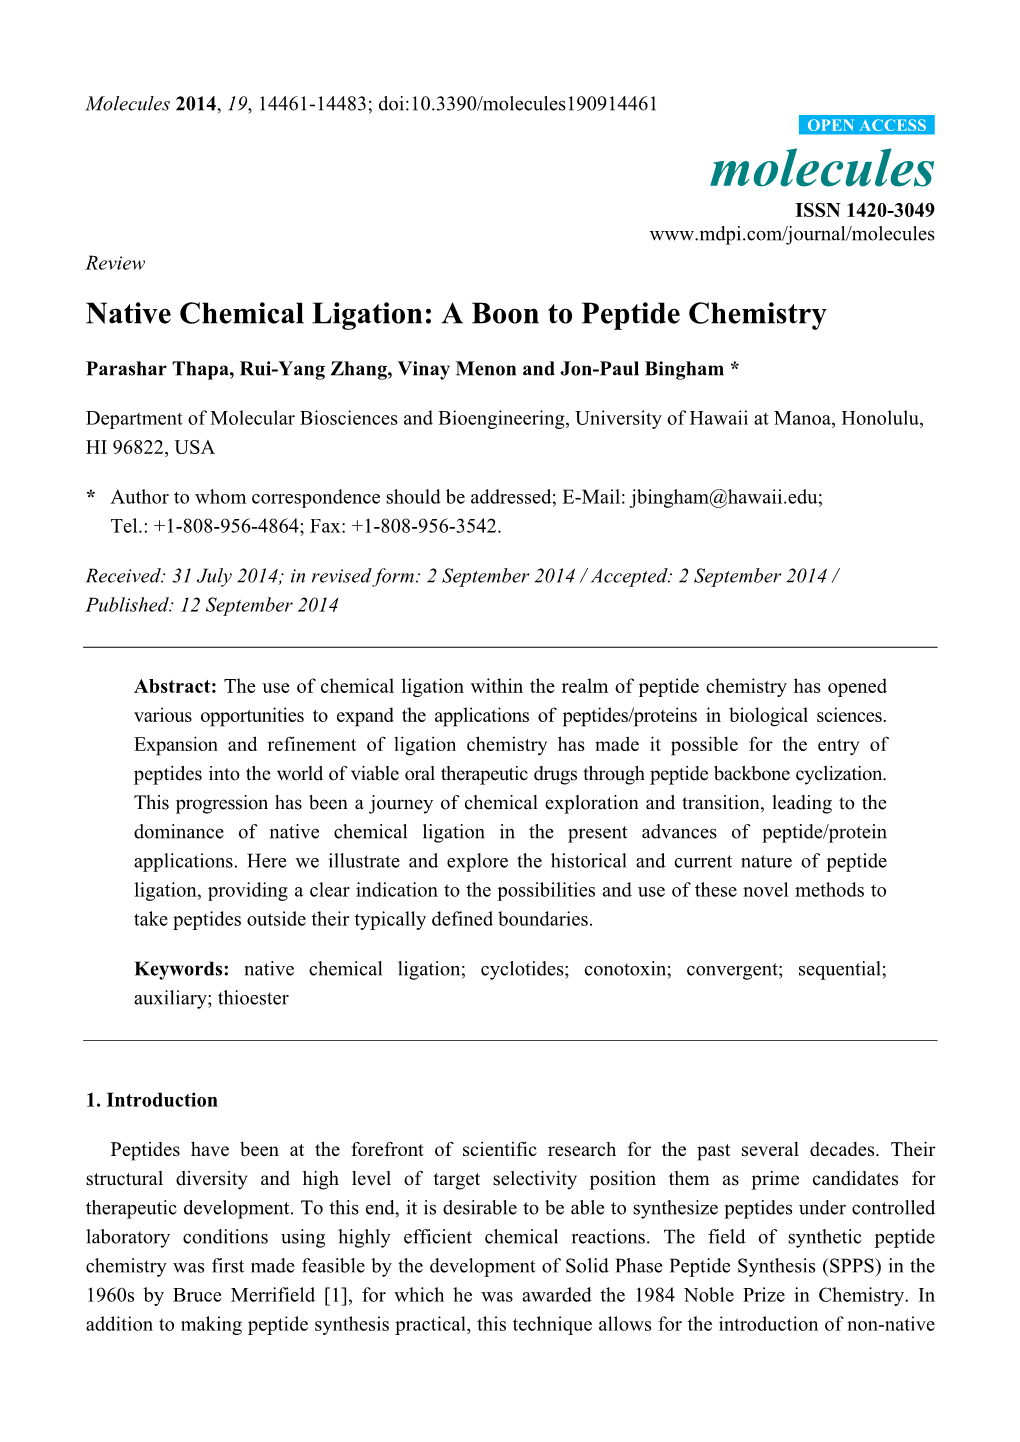 Native Chemical Ligation: a Boon to Peptide Chemistry